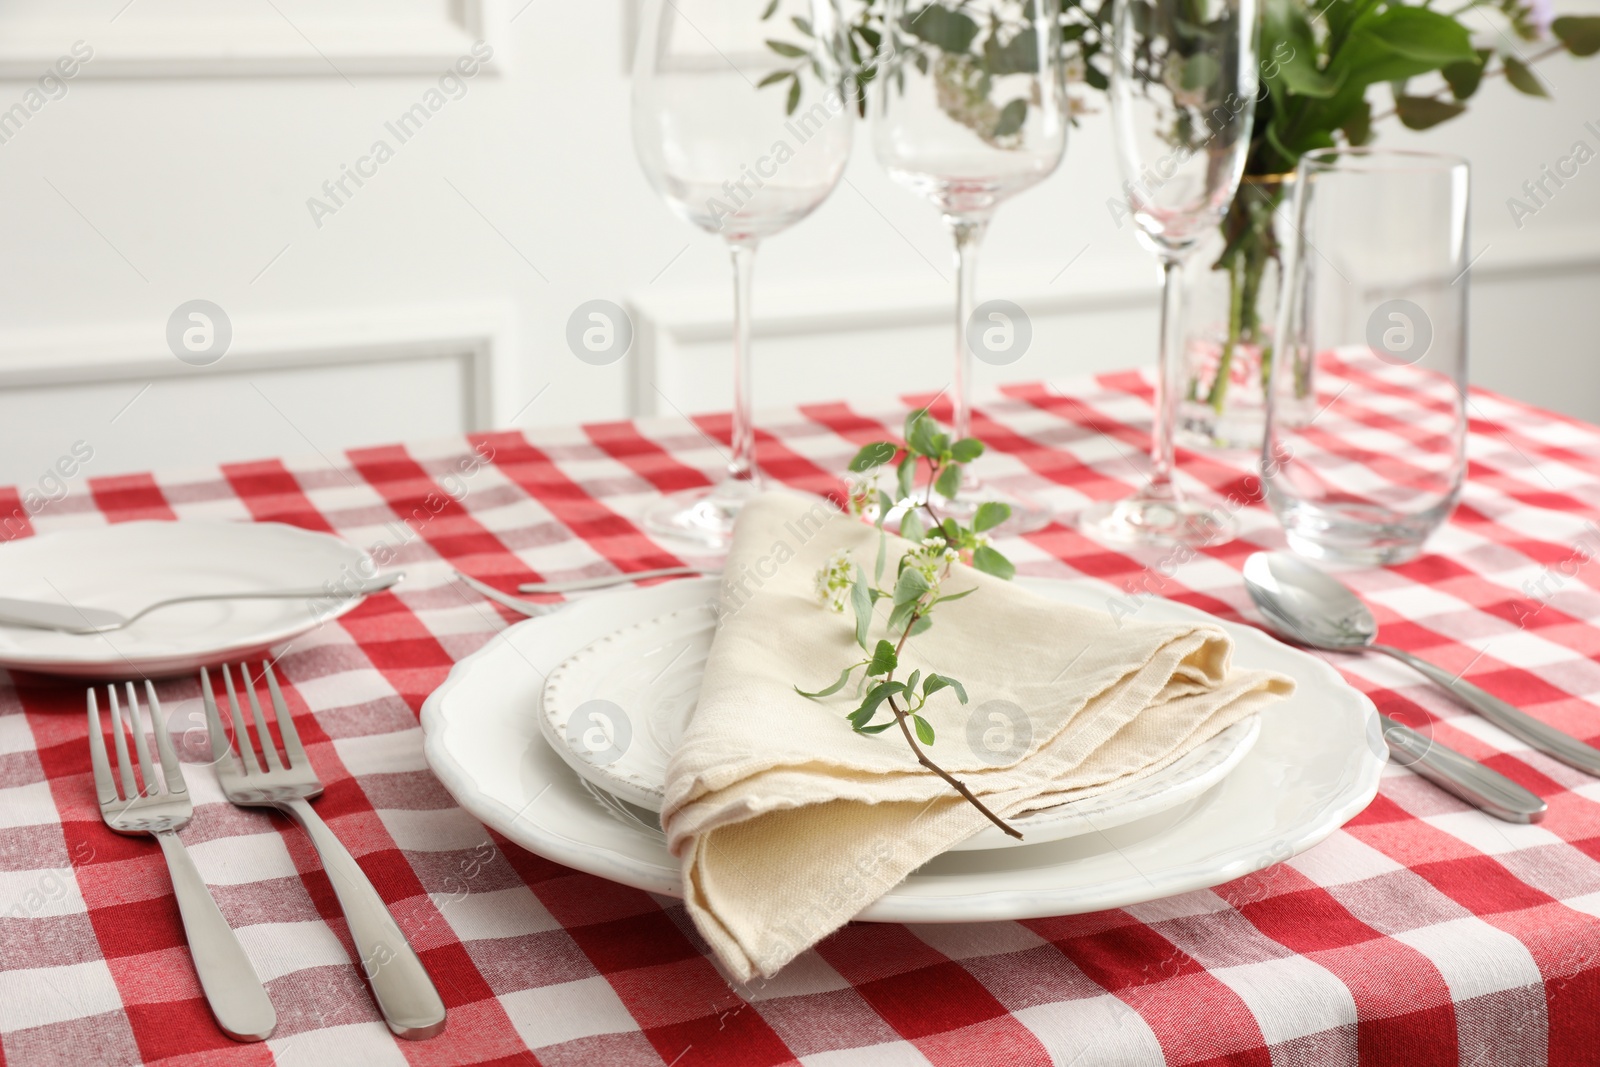 Photo of Stylish setting with cutlery, plates, napkin, glasses and floral decor on table